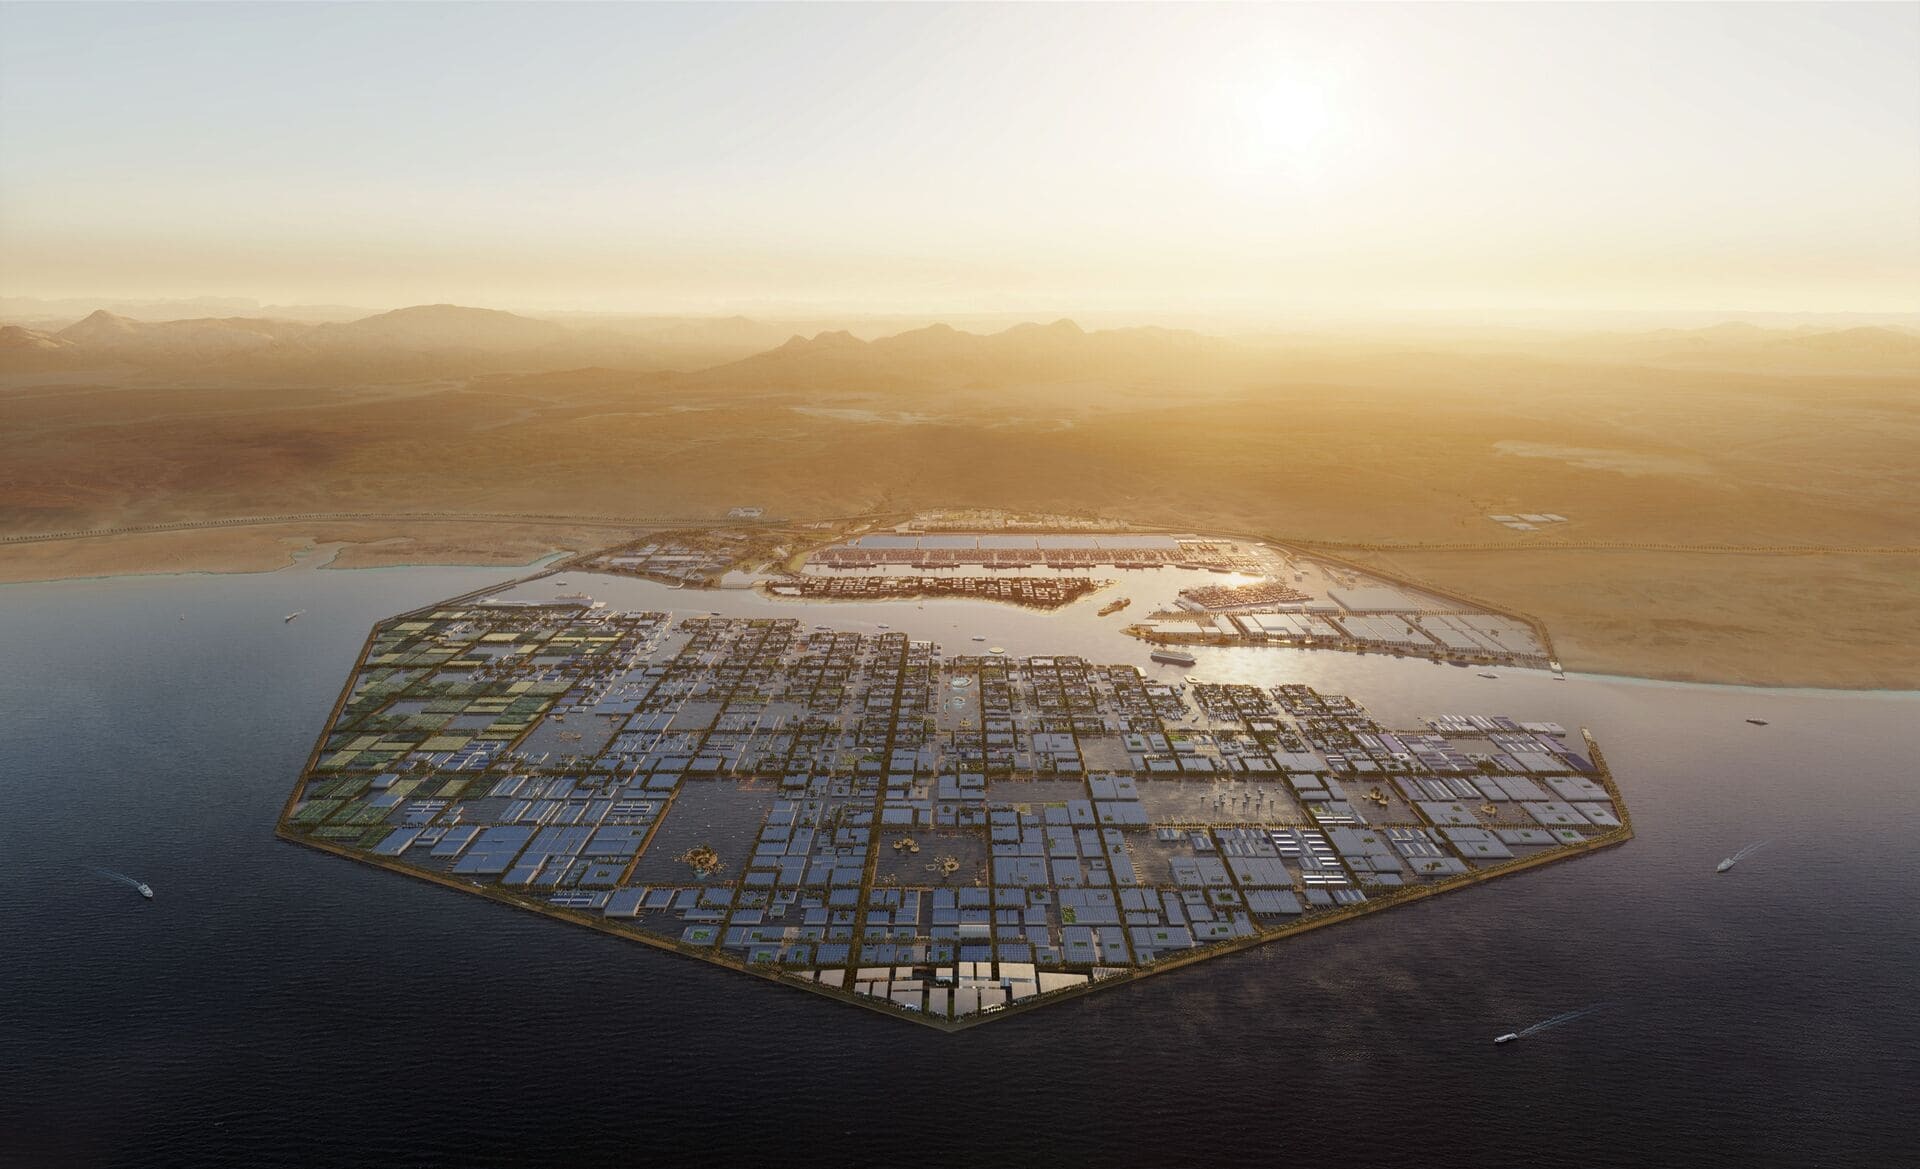 How Neom, located in the Arabian Peninsula, will provide itself with water